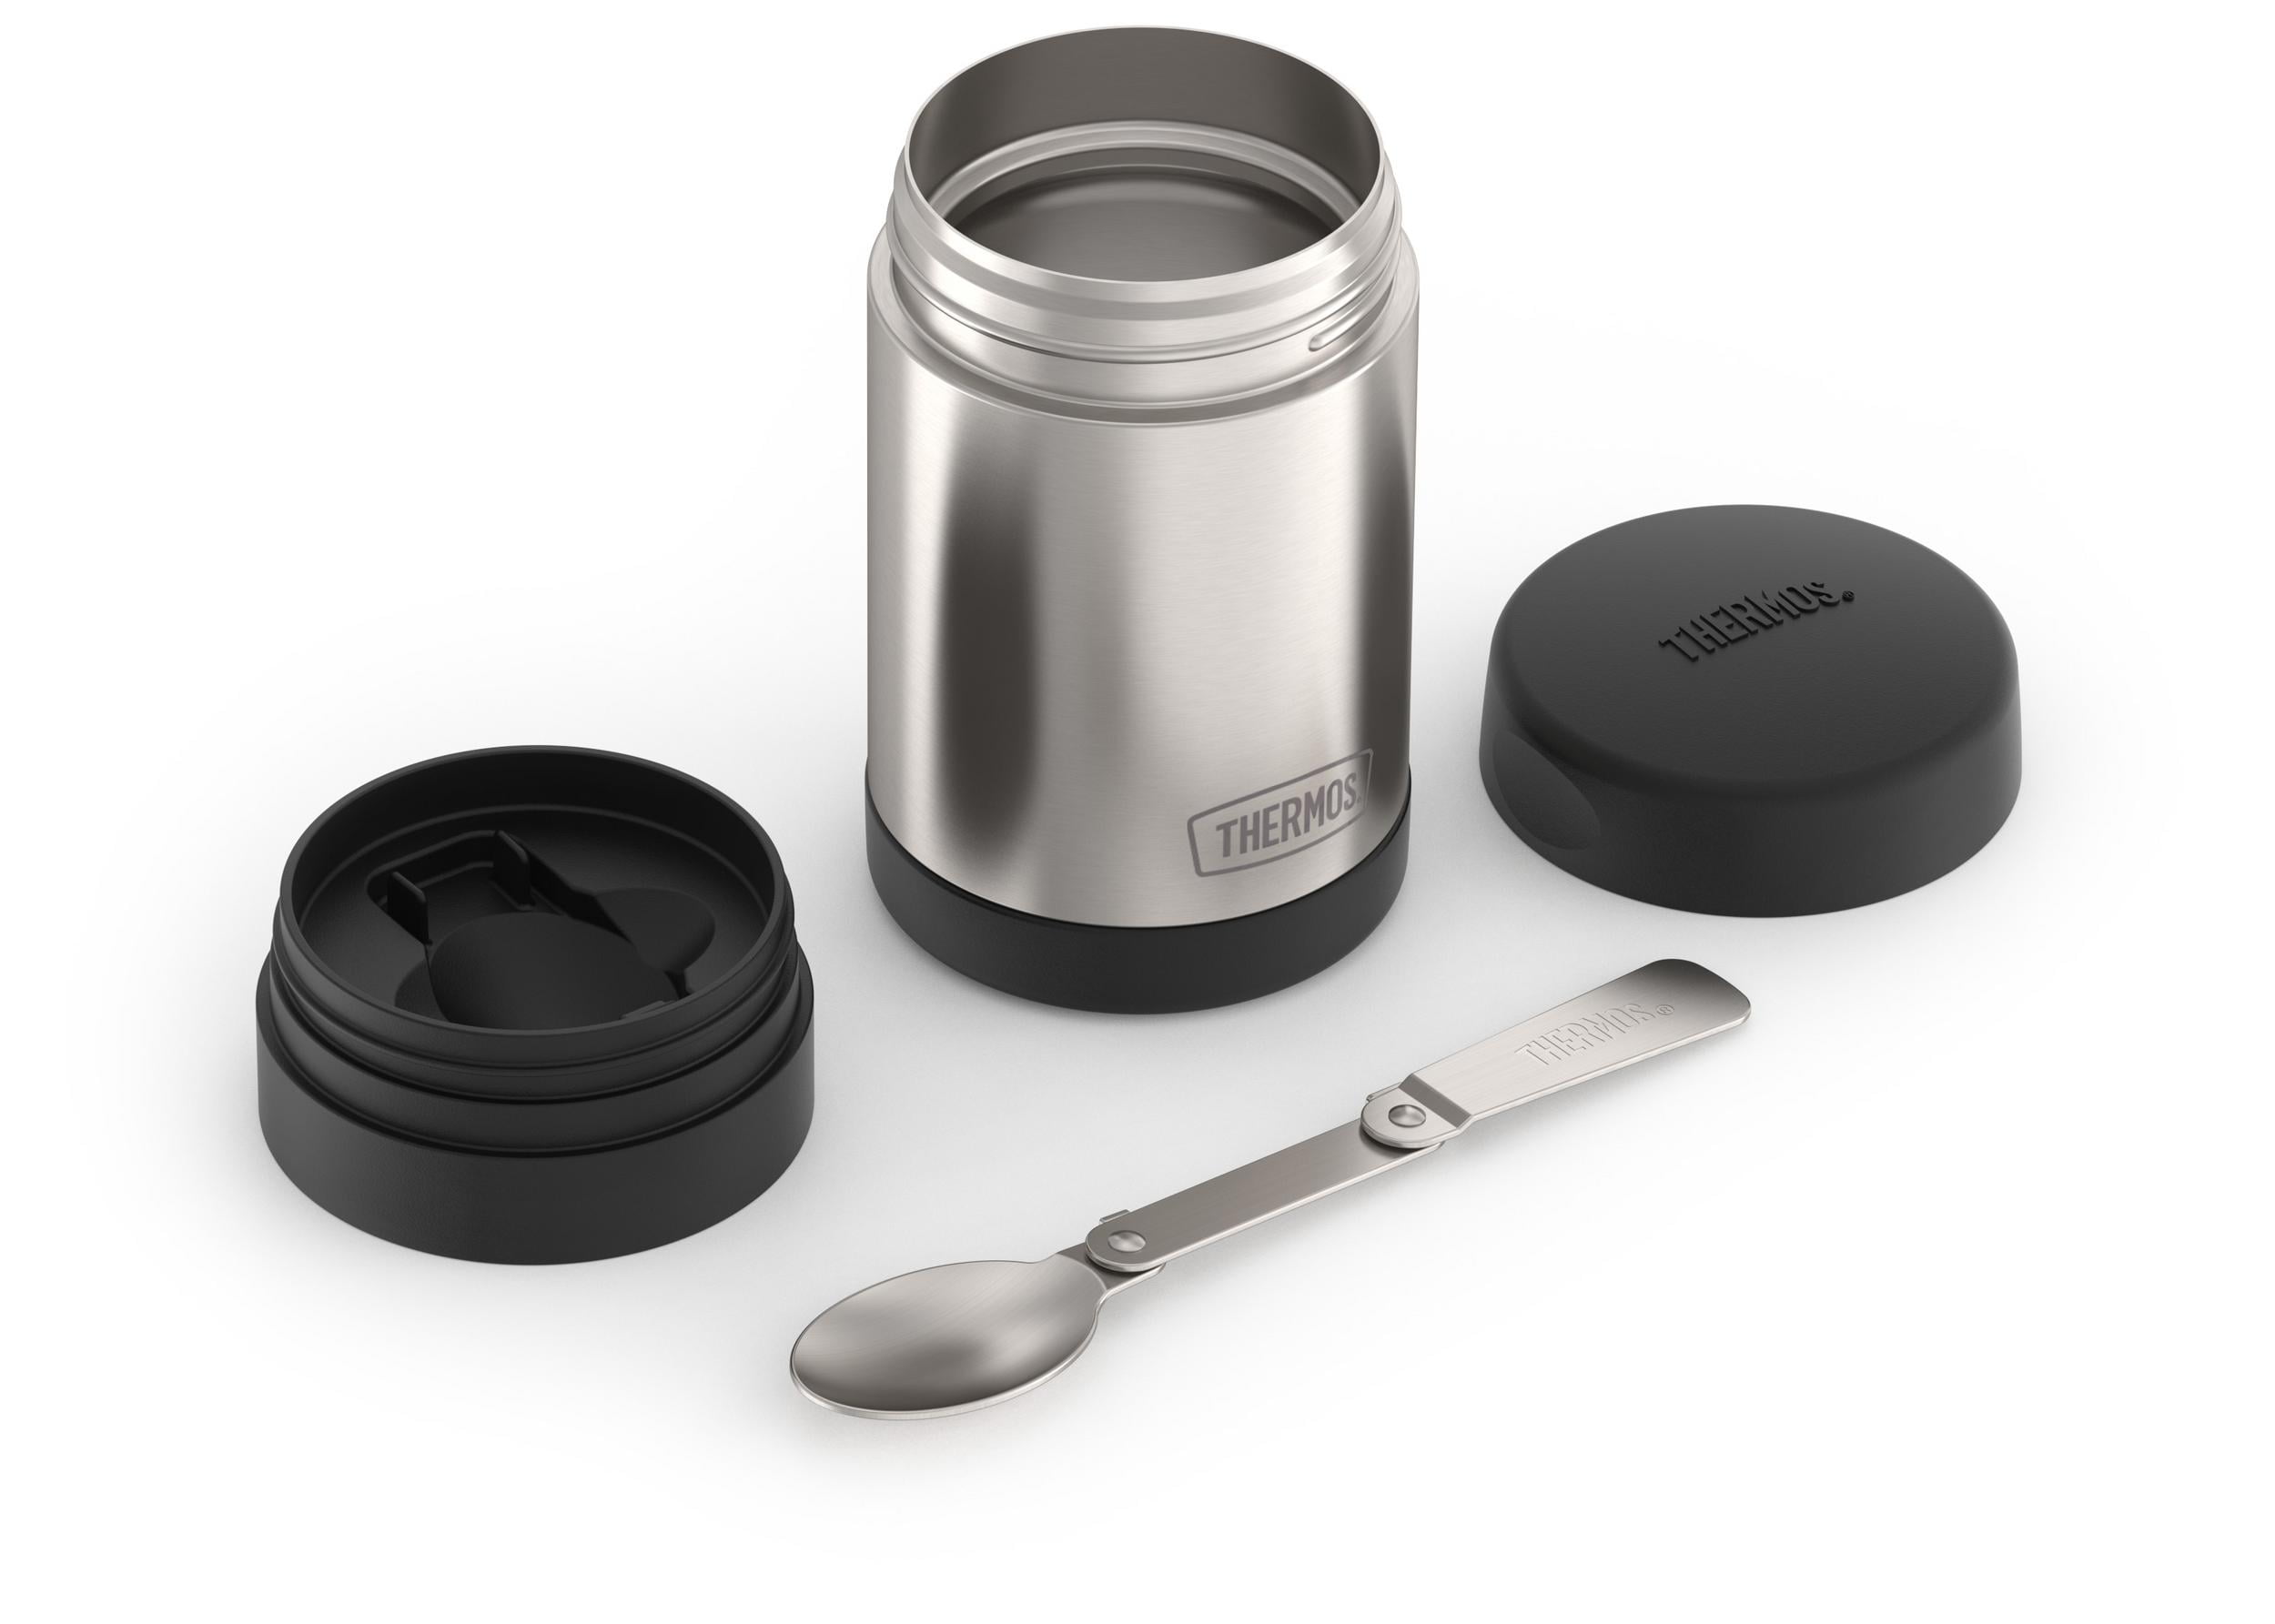 SMALLSHS Vacuum Insulated Food Jar with Foldable Spoon, Stainless Steel  Thermal Food Container Food Thermos Soup Cup Leak Proof Hot Cold Food for